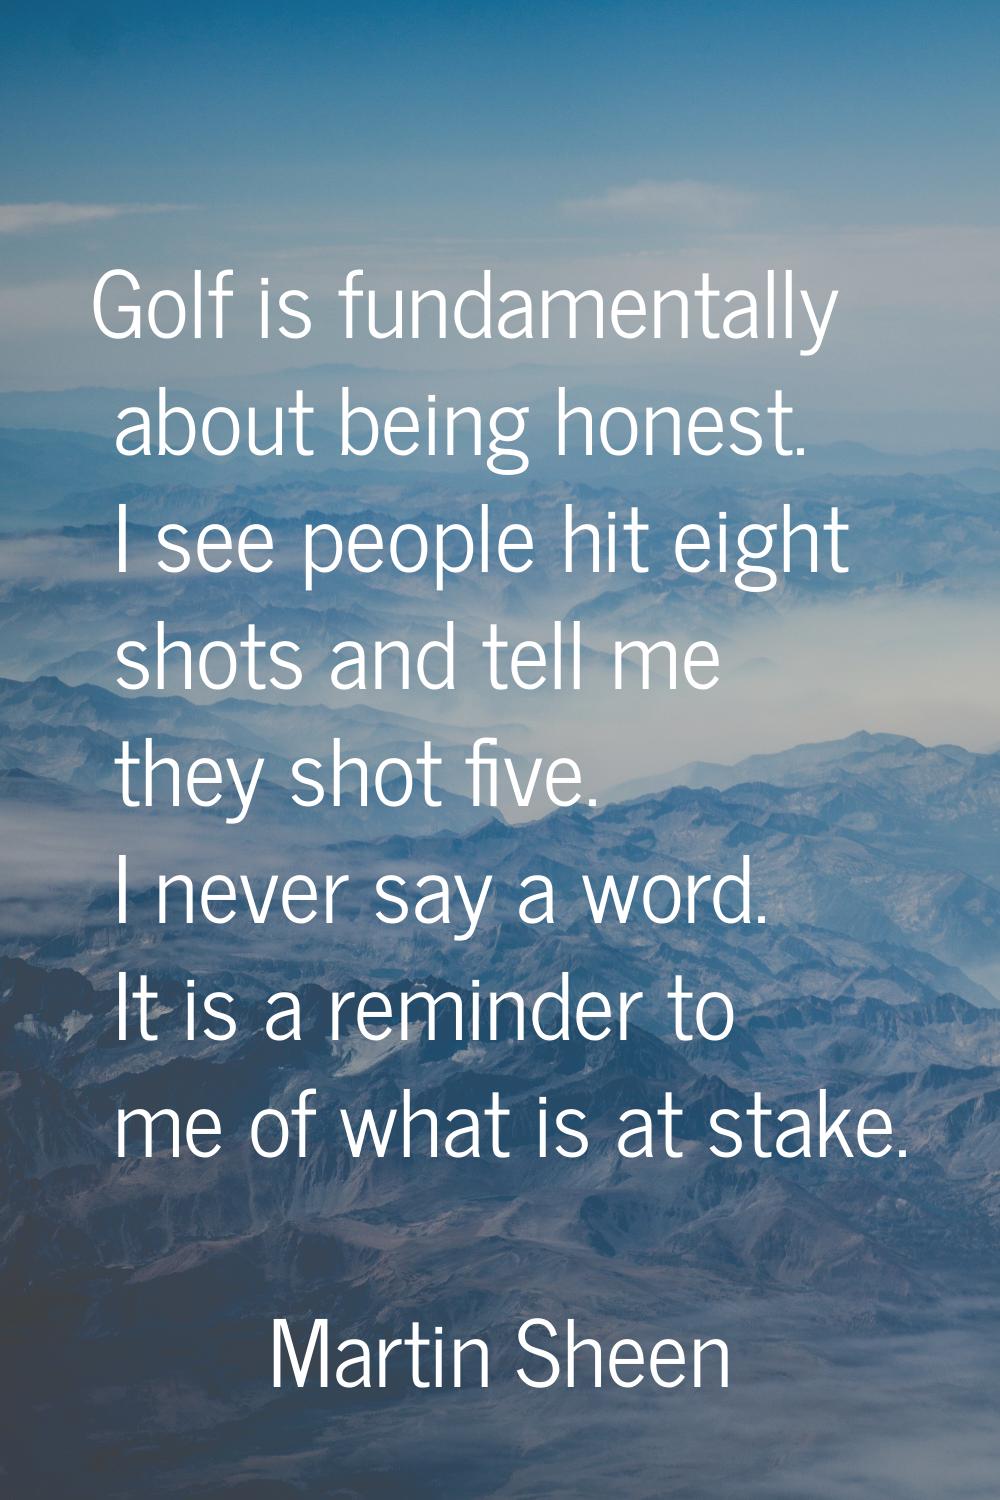 Golf is fundamentally about being honest. I see people hit eight shots and tell me they shot five. 